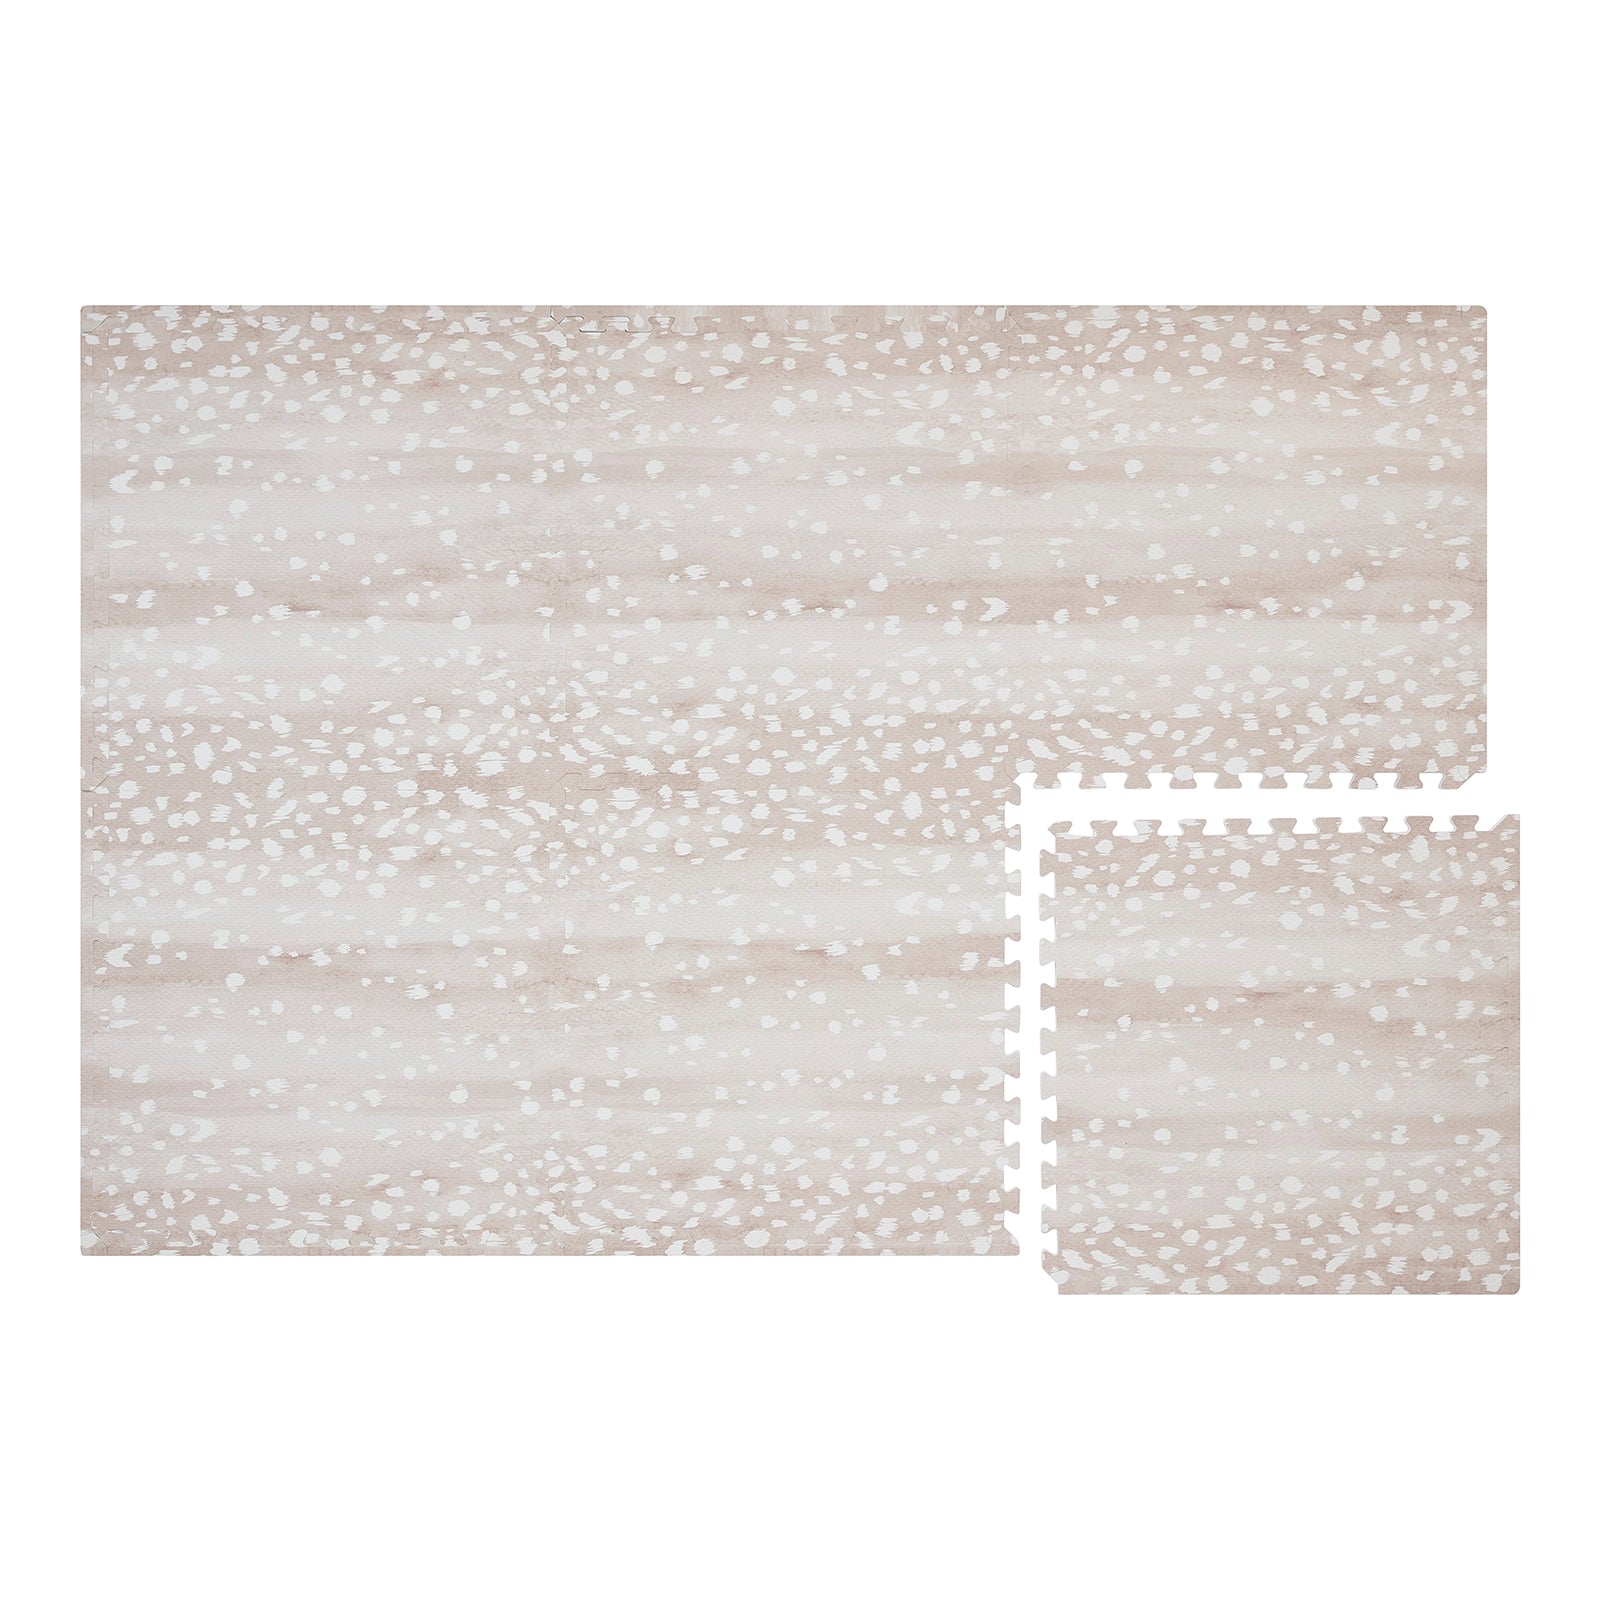 Fawn neutral beige animal print baby play mat. Shown in size 4x6 with 1 tile separated.